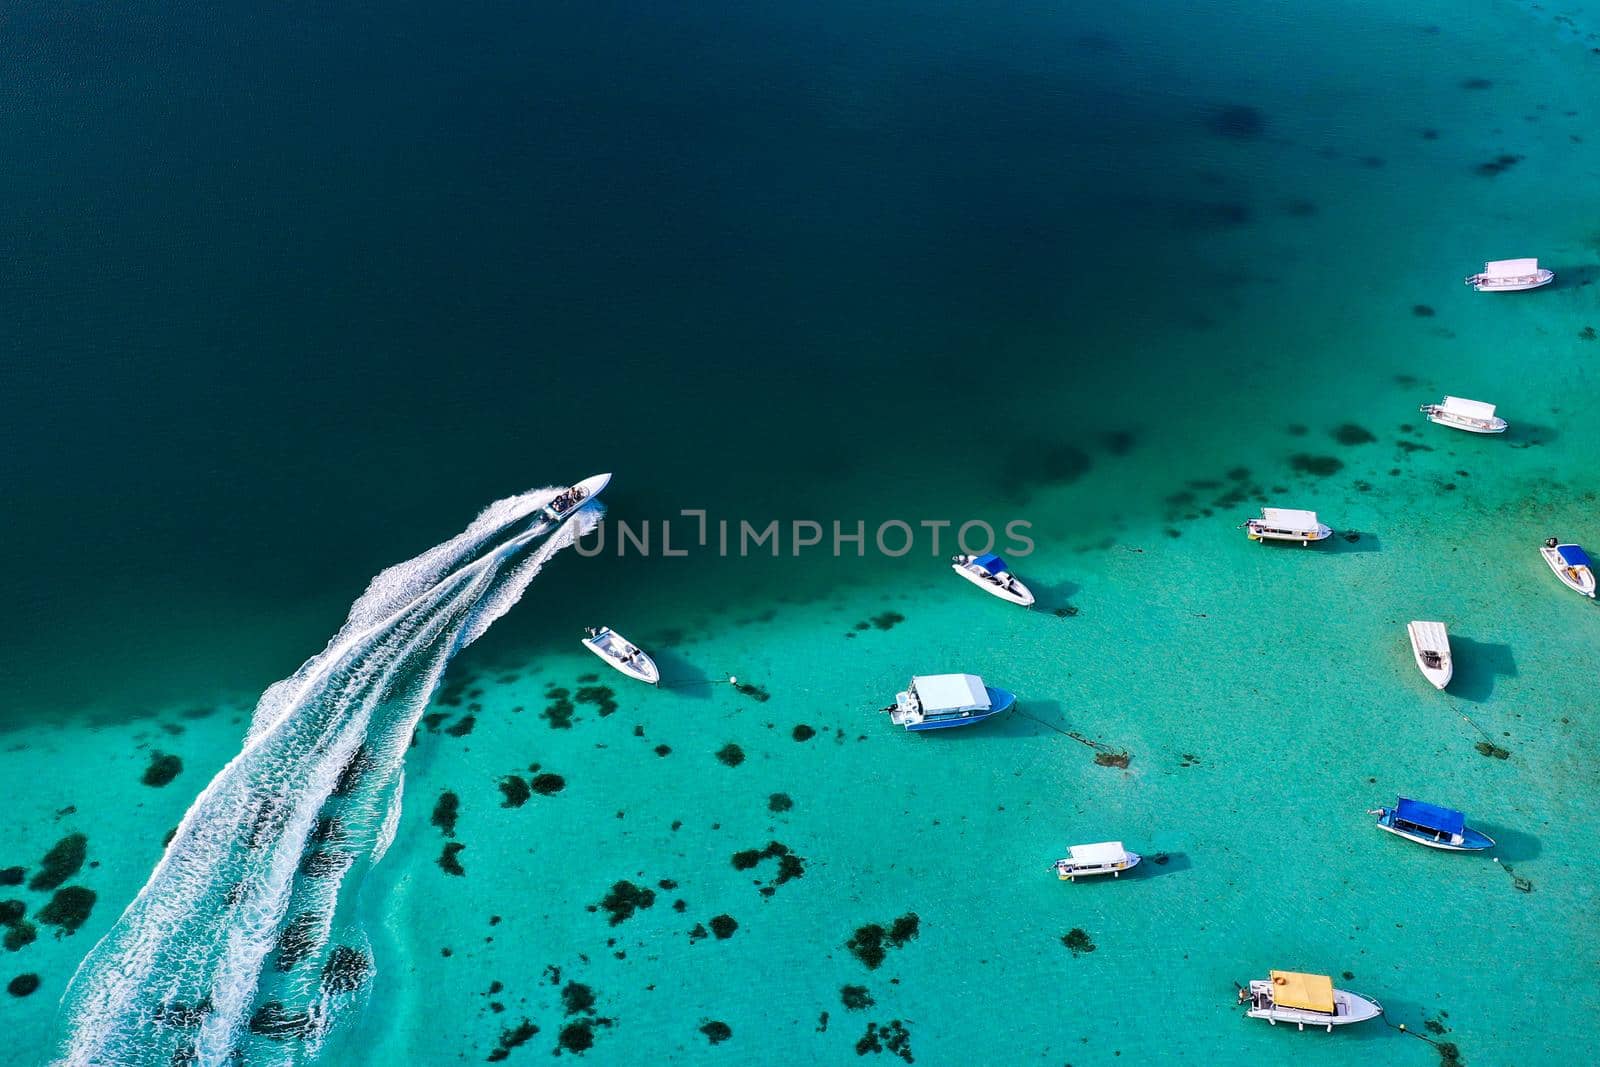 Top view of the Blue Bay lagoon of Mauritius. A boat floats on a turquoise lagoon.